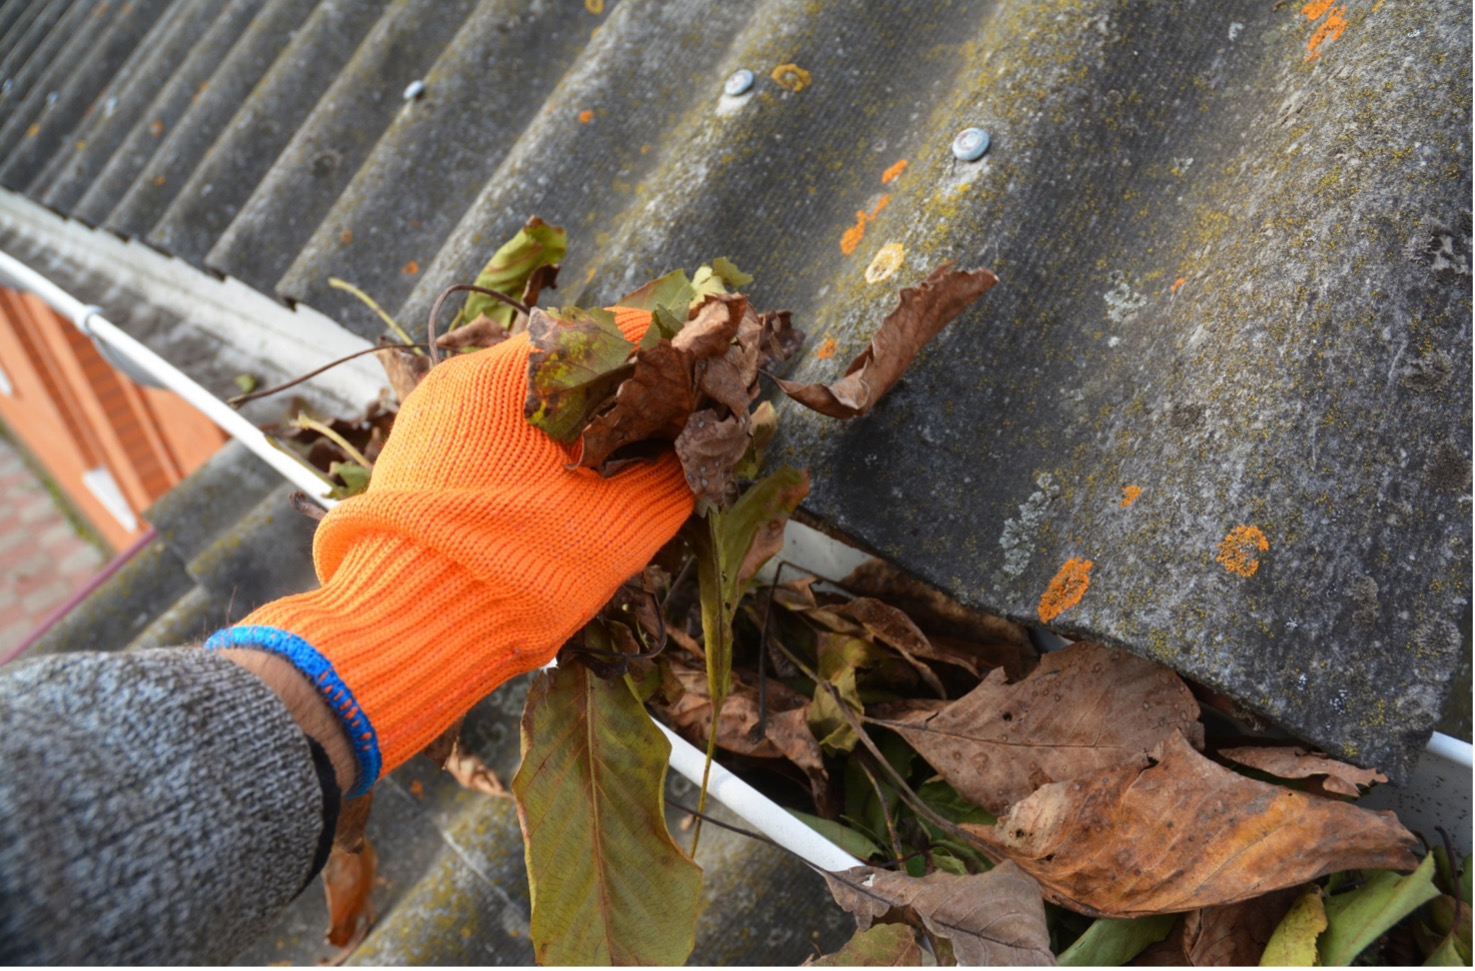 Clearing debris from a gutter